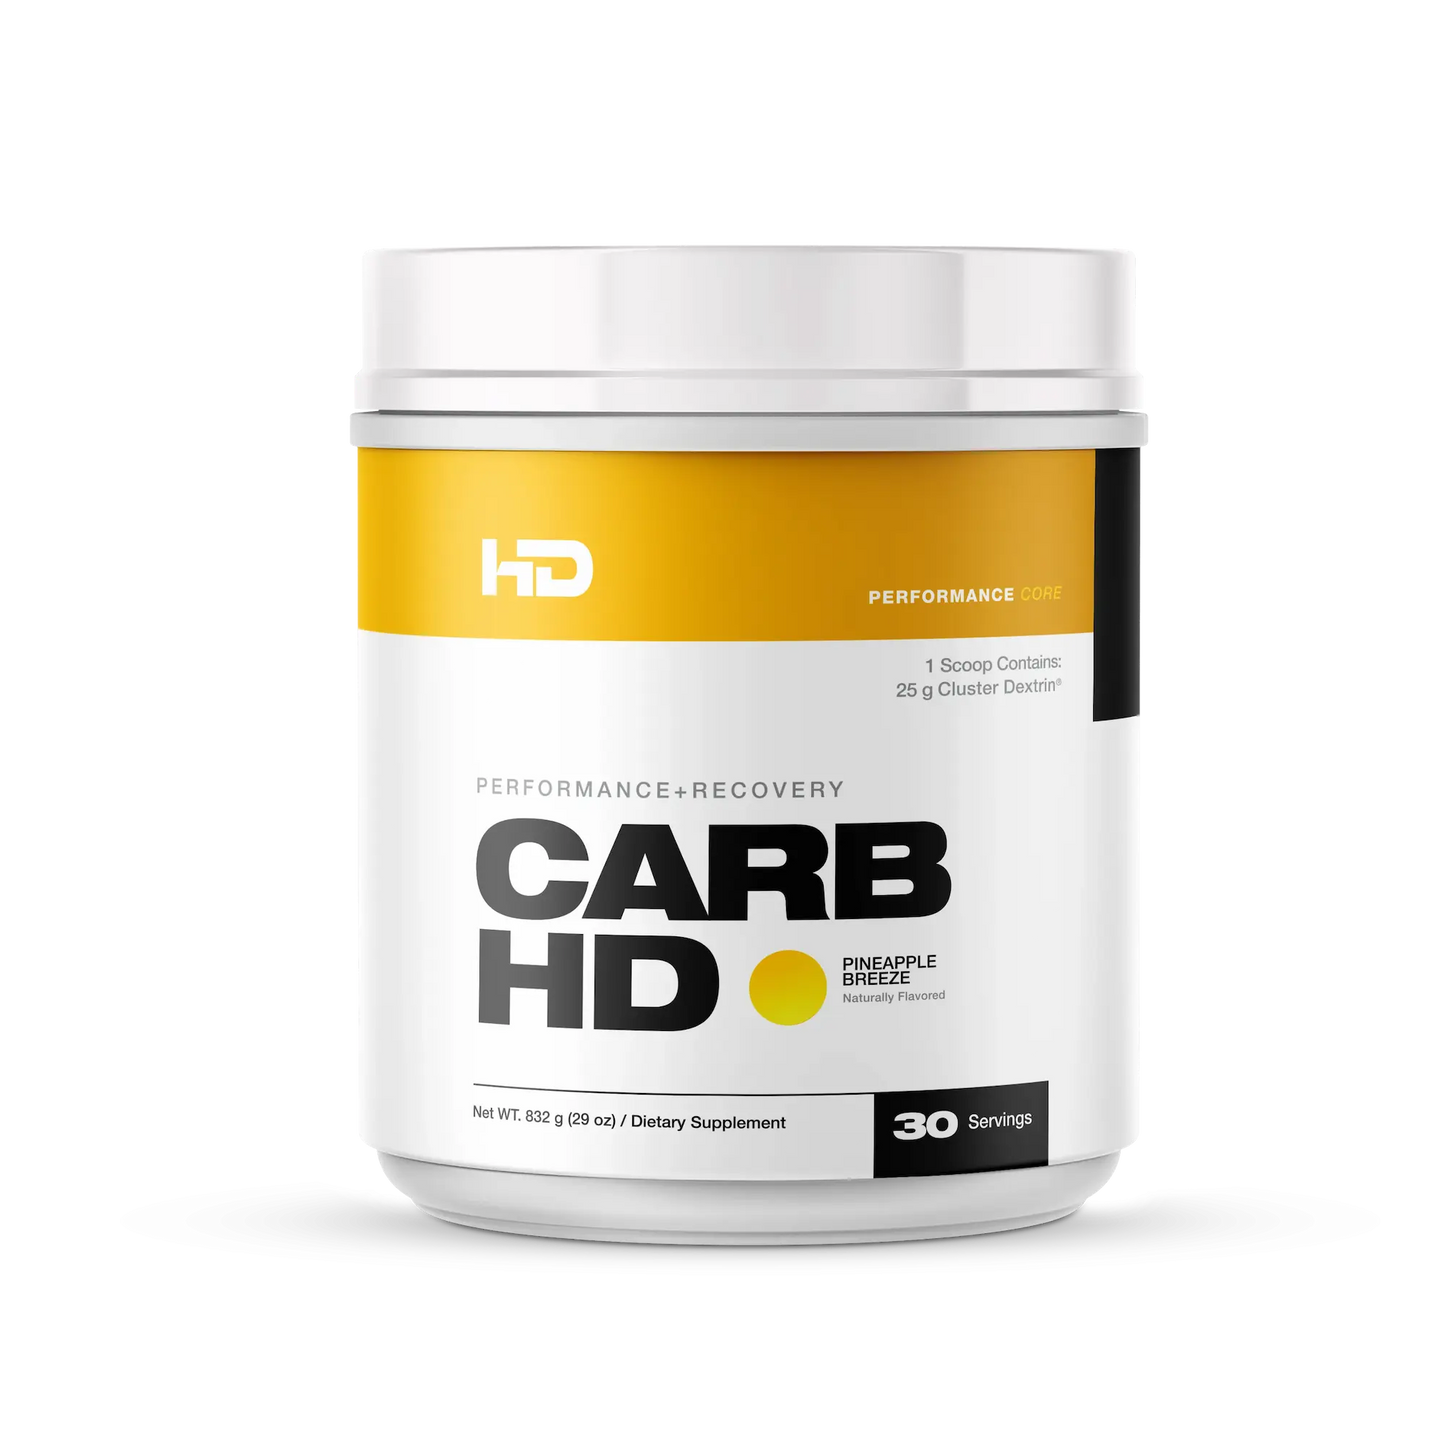 HD Muscle - CarbHD Pineapple Breeze